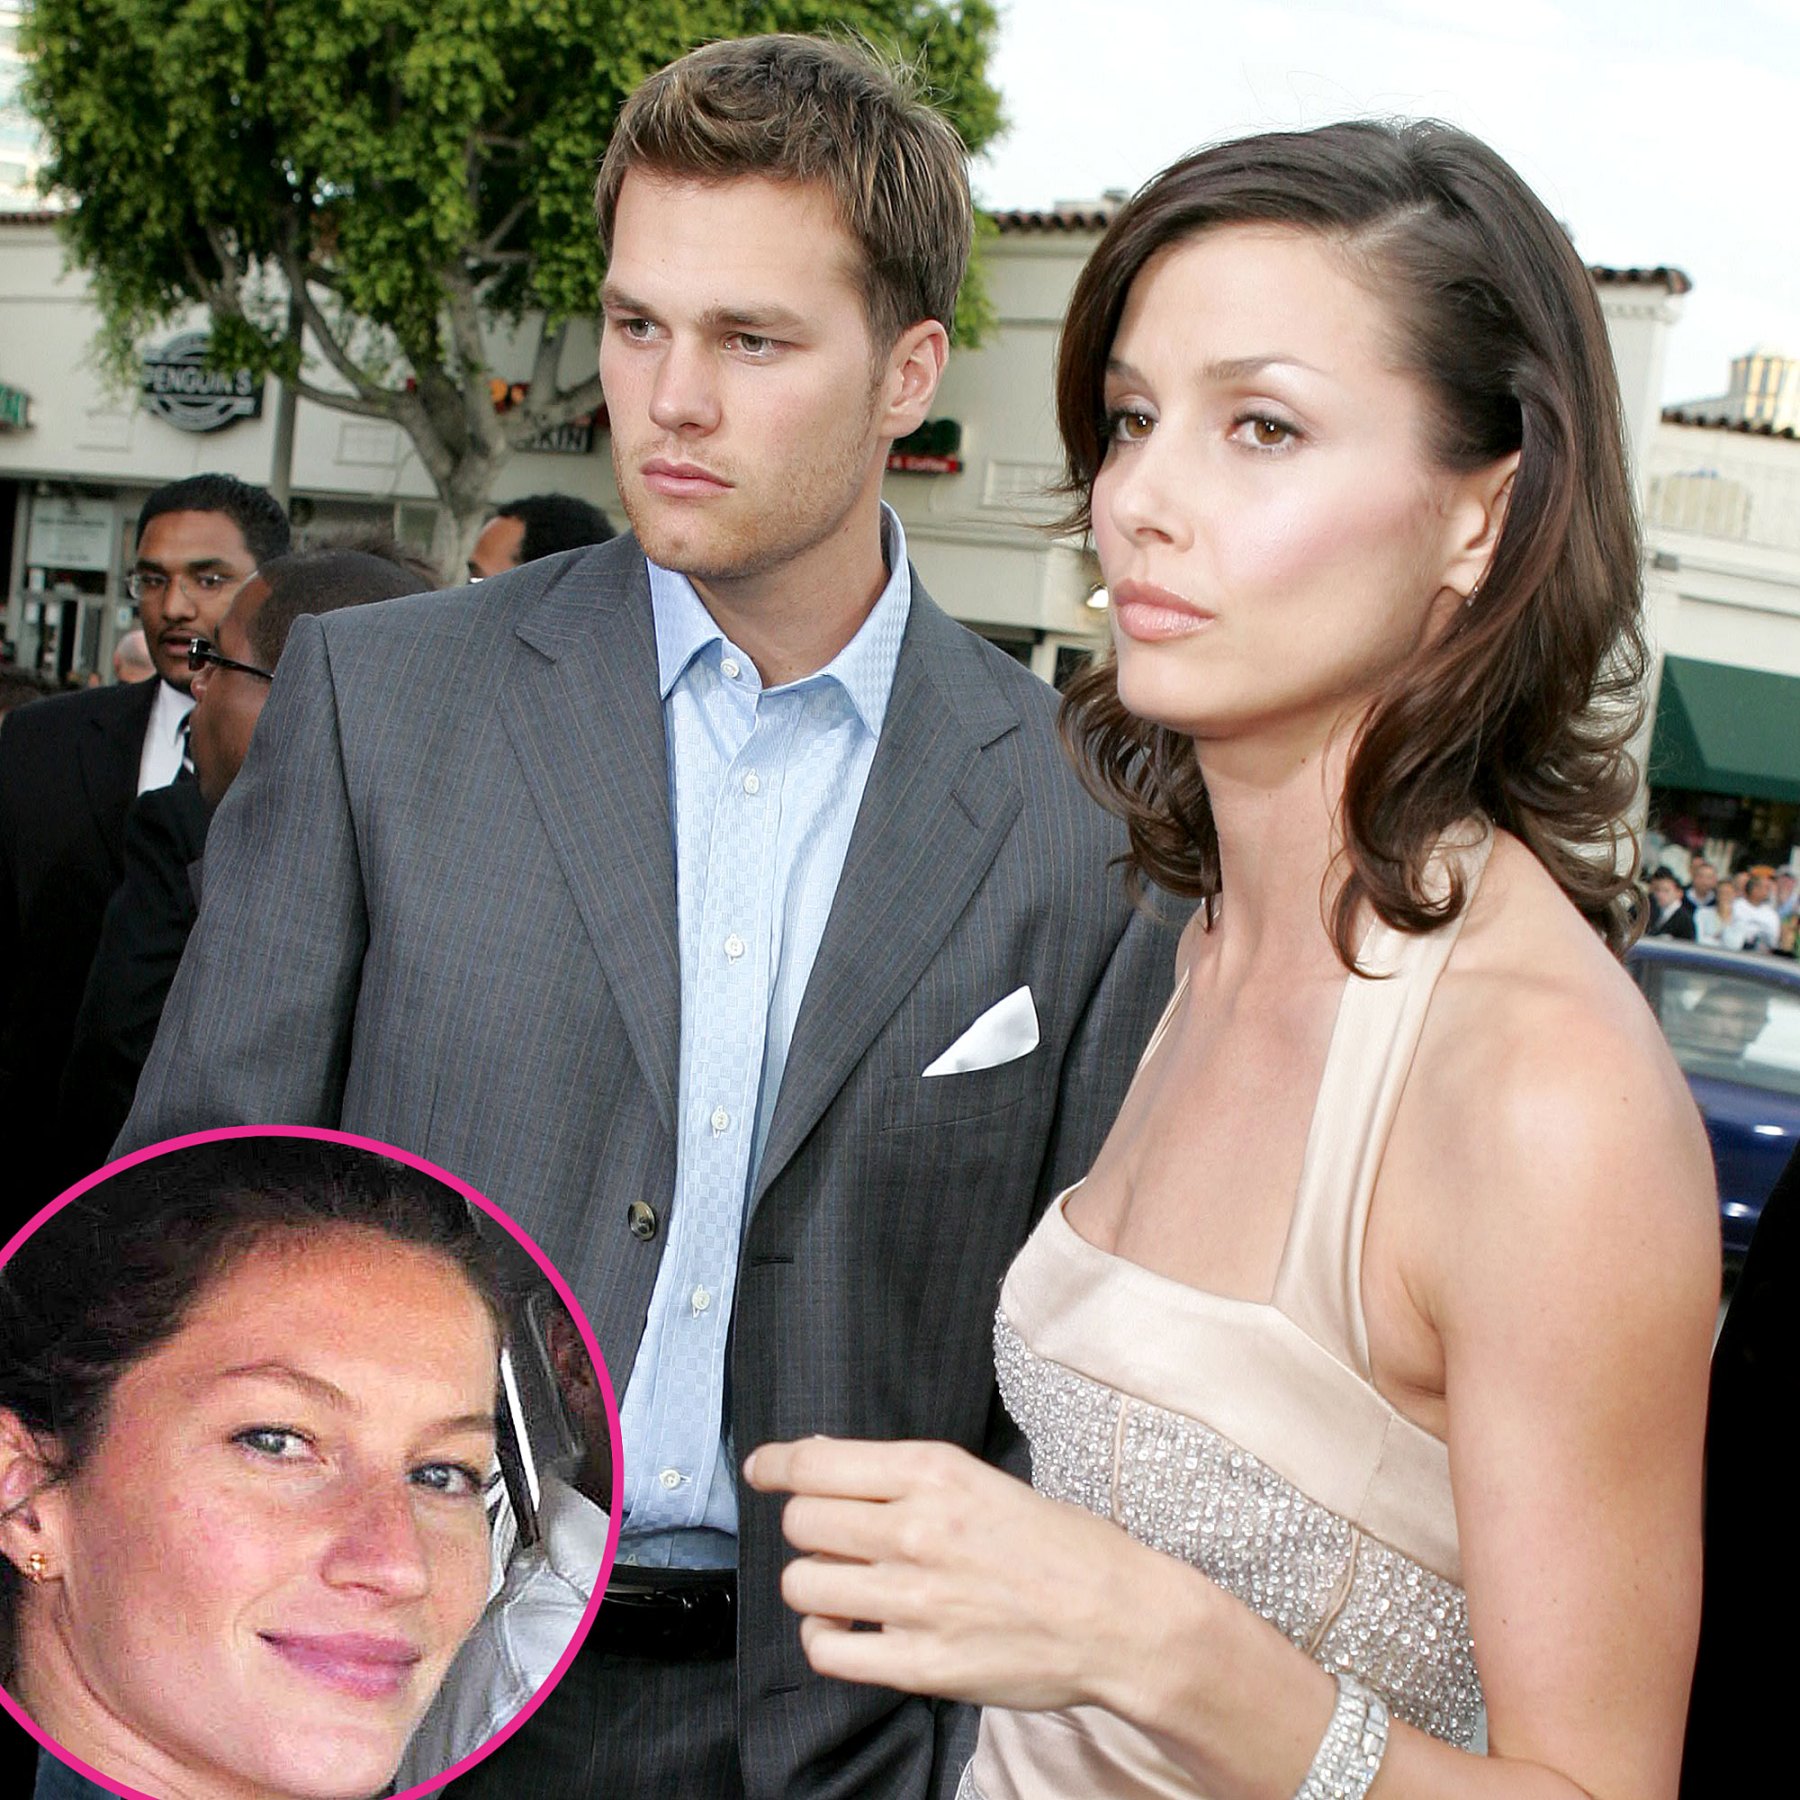 Bridget Moynahans Quotes About Her Relationship With Ex Tom Brady 5073